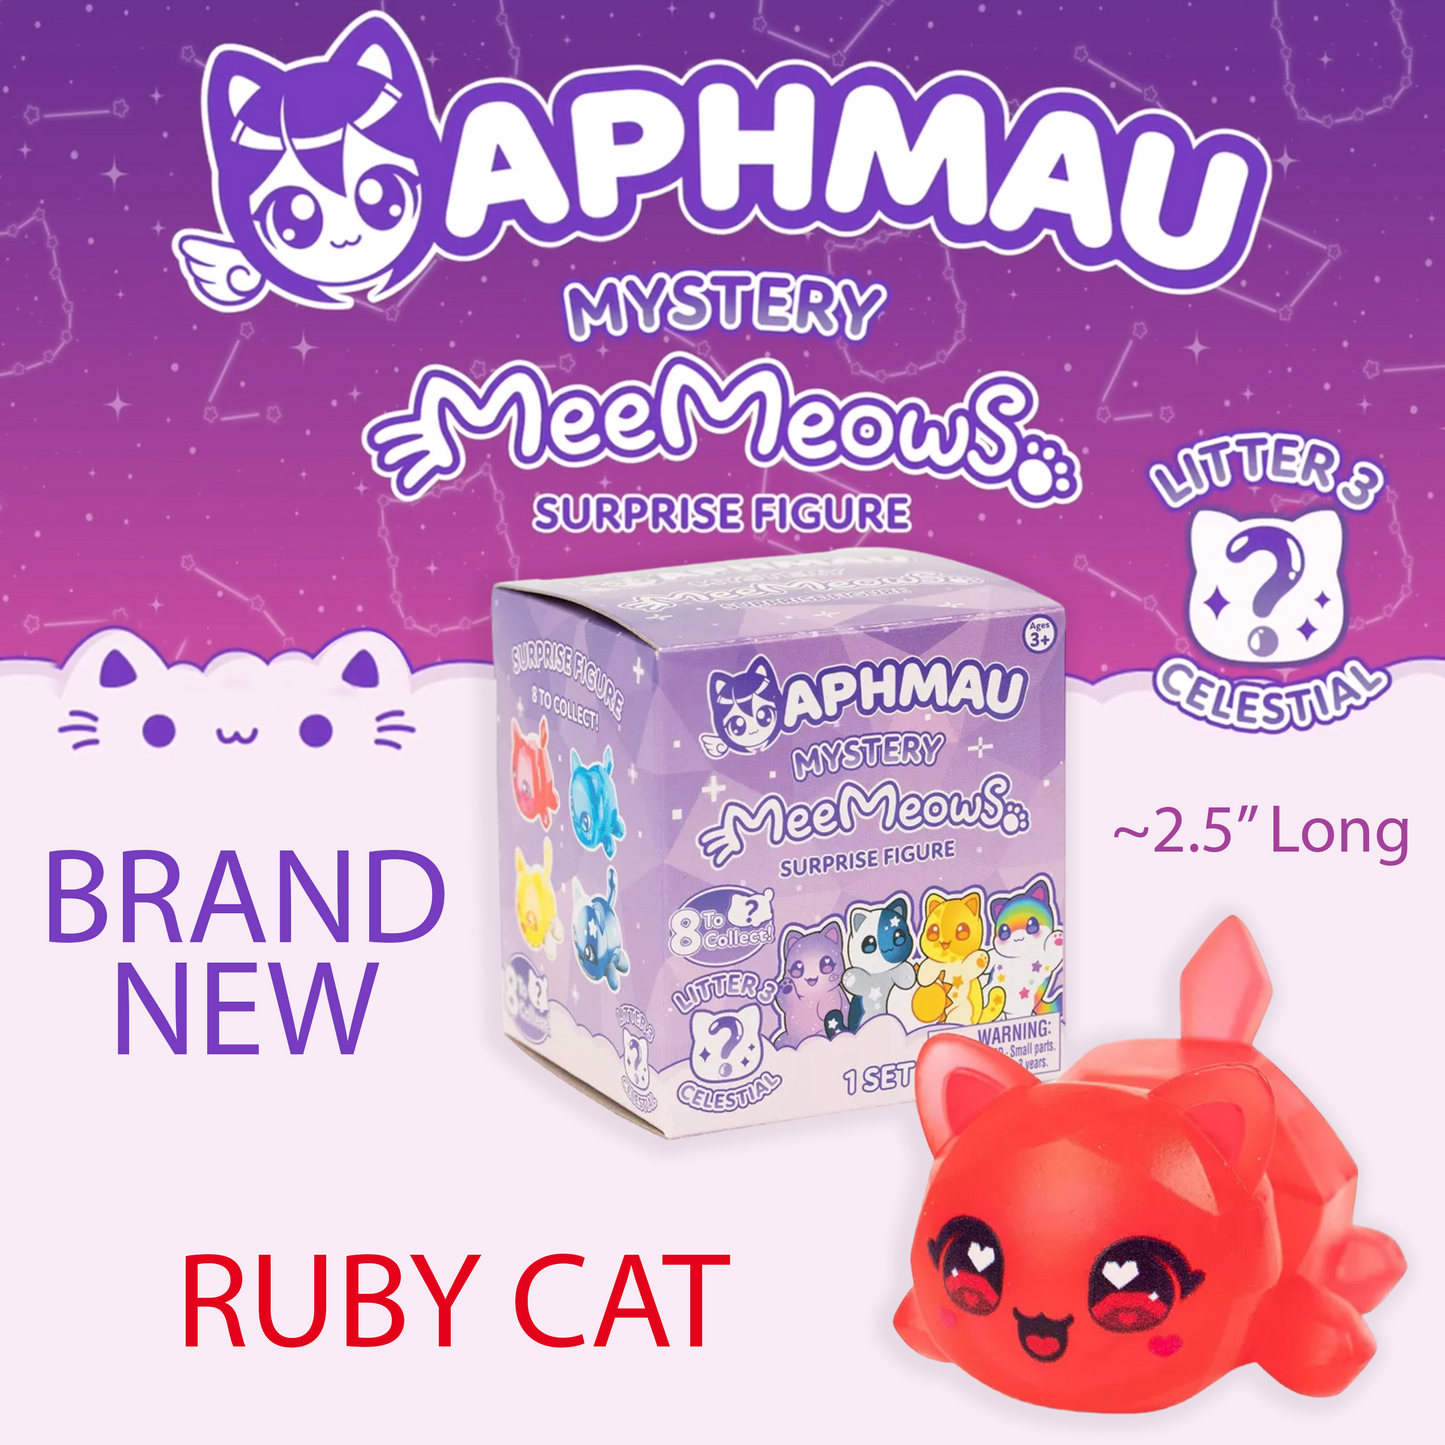 RUBY CAT - MeeMeows Mystery Cat Figure Litter 3 from Aphmau (NEW) Cute Kitty